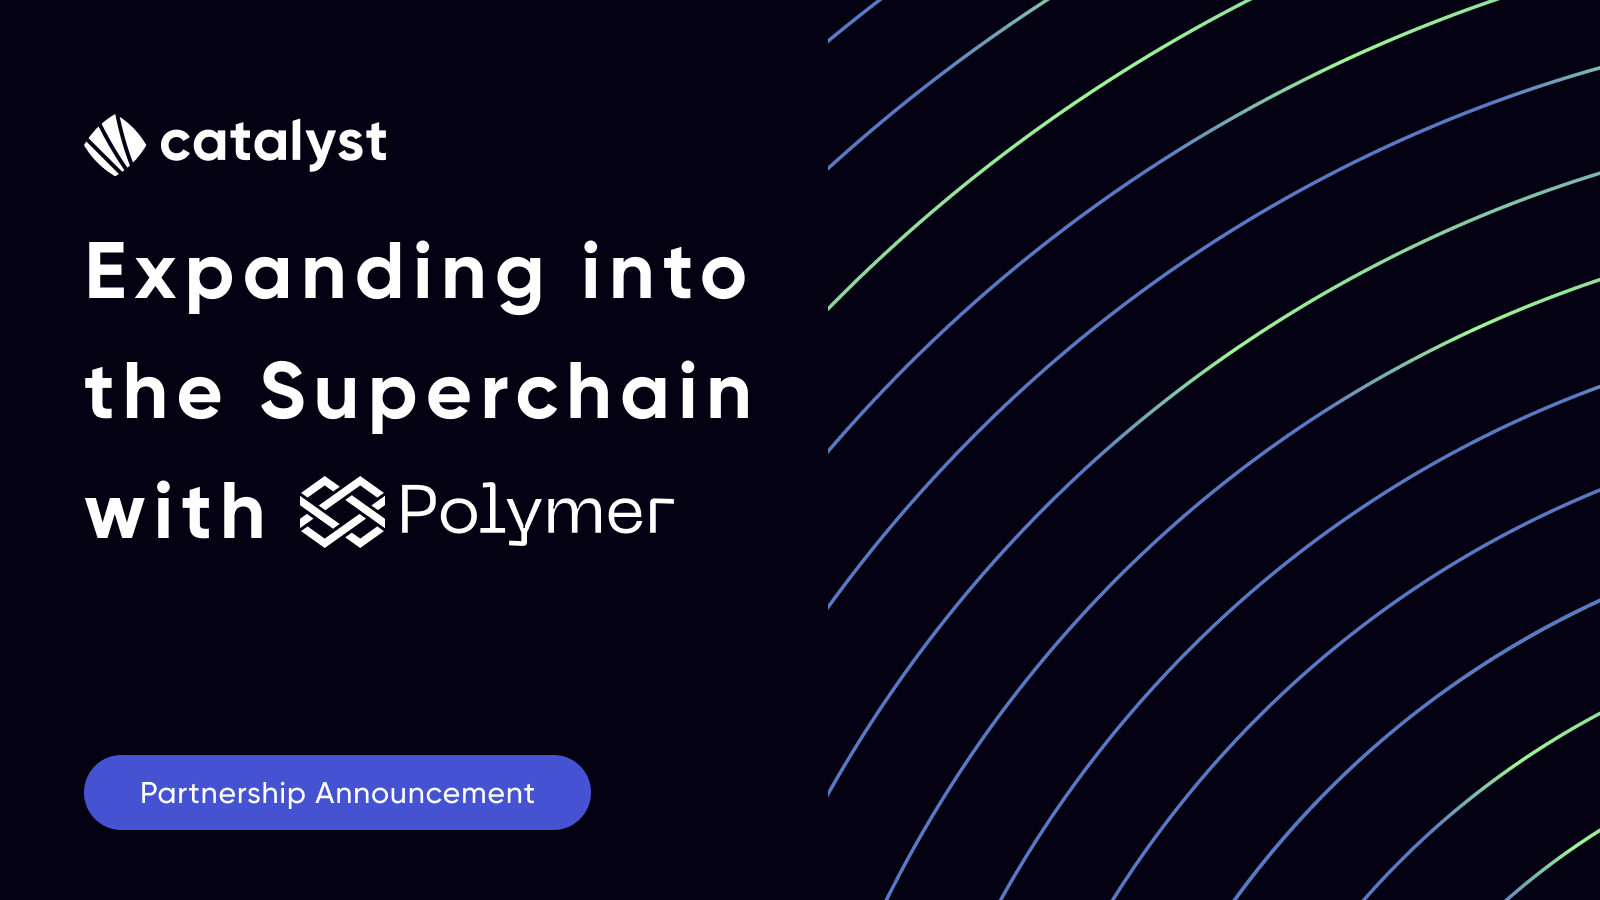 Expanding into the Superchain with Polymer